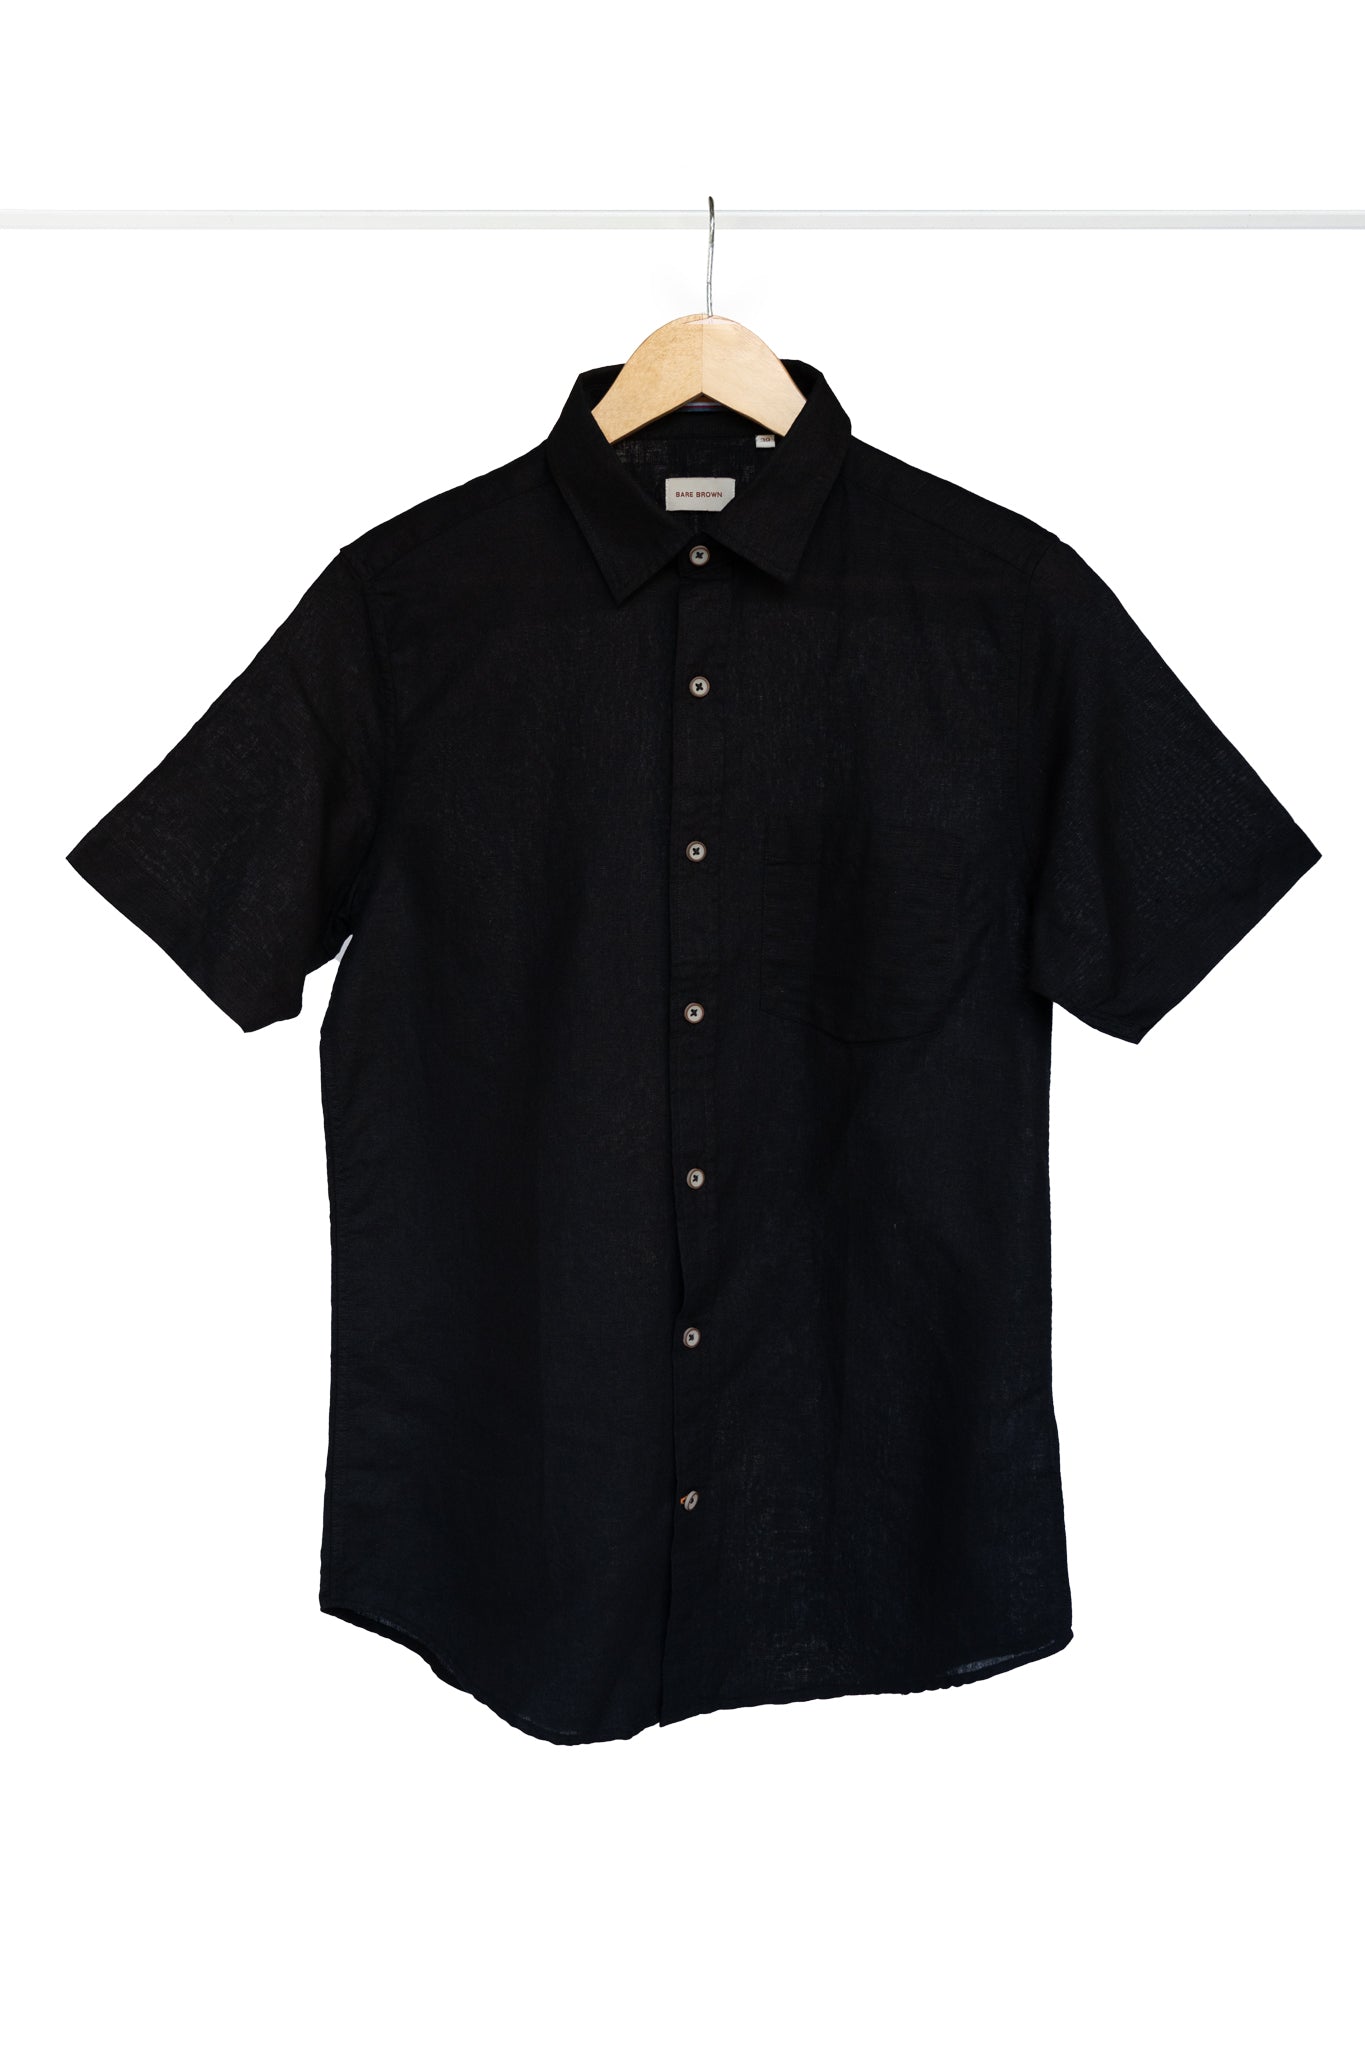 Bare Brown Cotton Linen Shirt, Slim Fit with Half Sleeves - Black